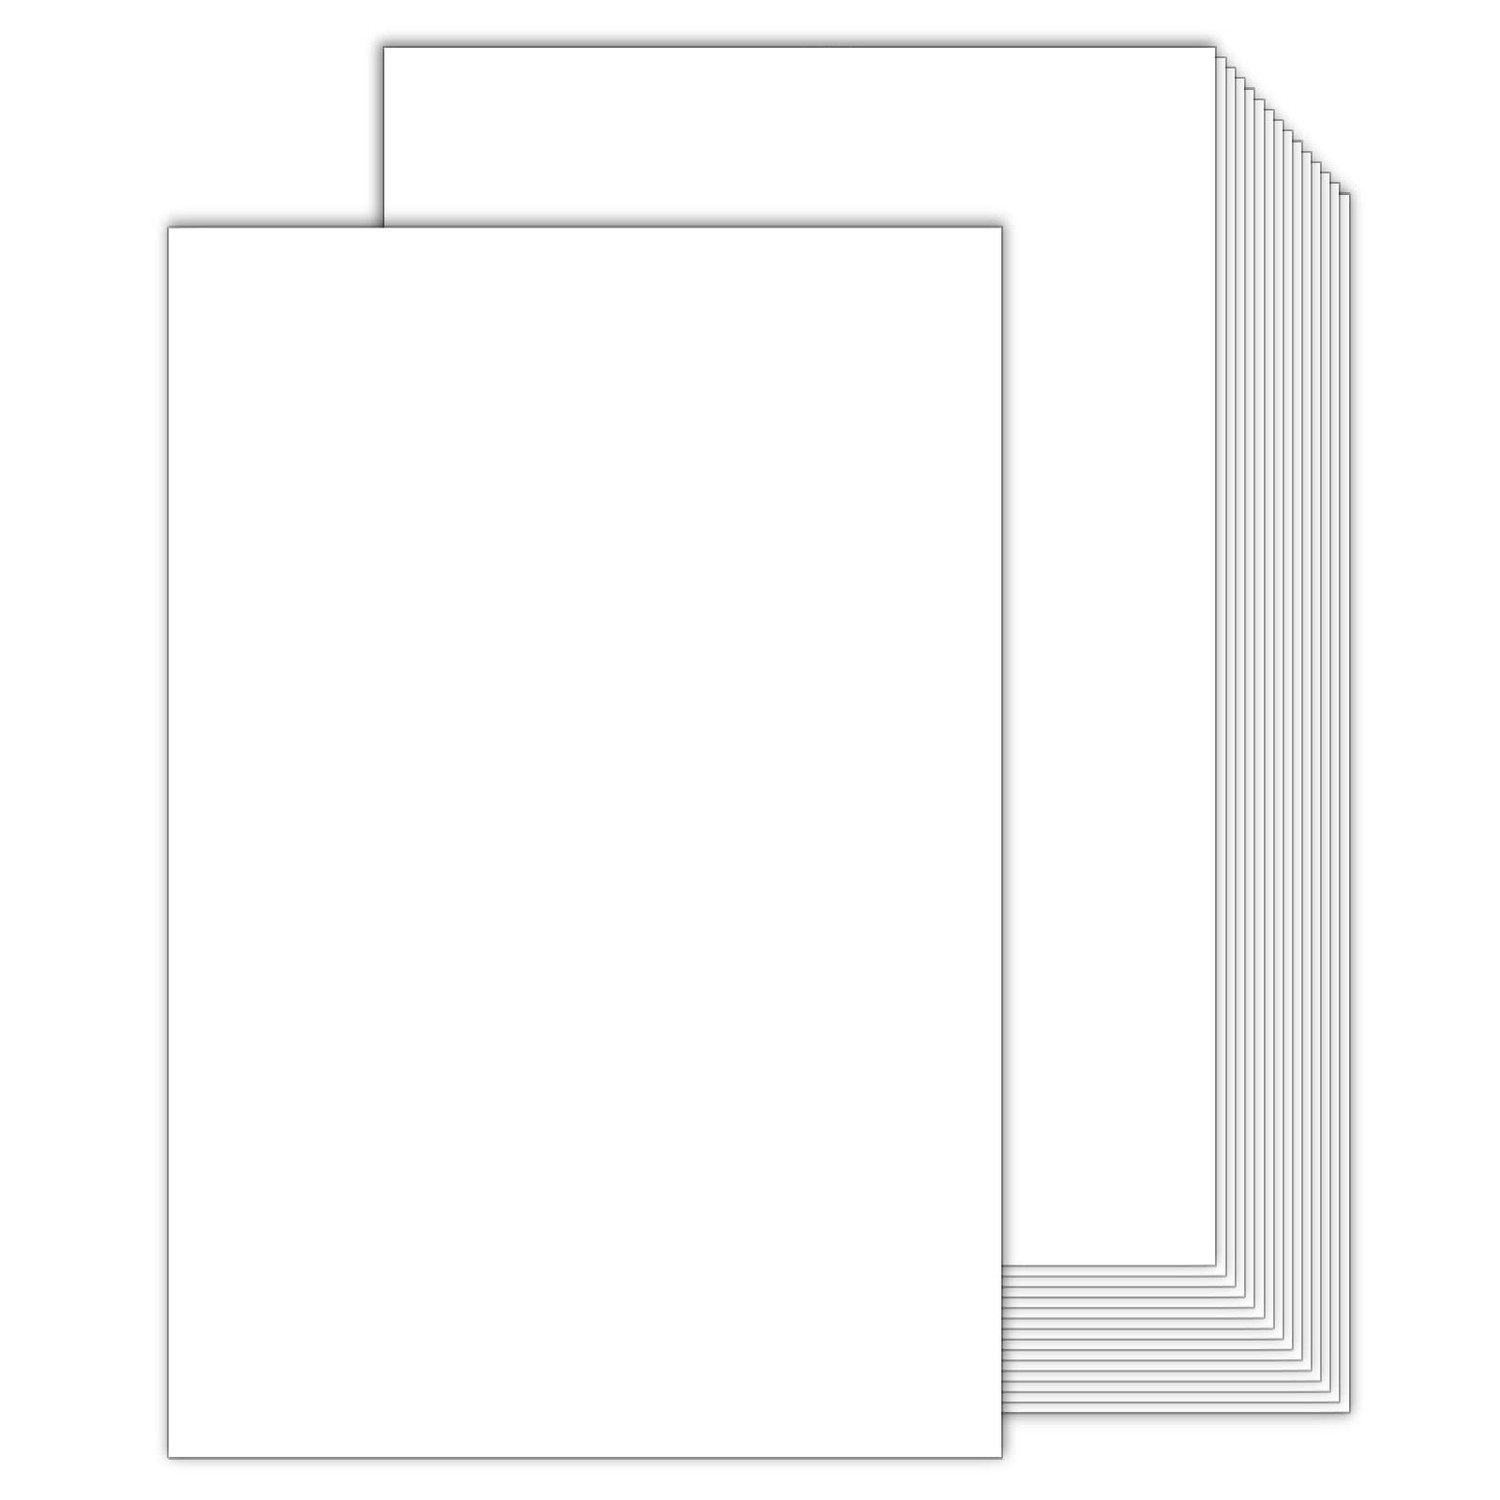  100 Sheets White Blank Cover Stock 11x17 Thick Card Stock,  Goefun 80lb Heavyweight Legal Size Printer Paper For Arts and Crafts,  Flyers, Menus, Posters : Office Products